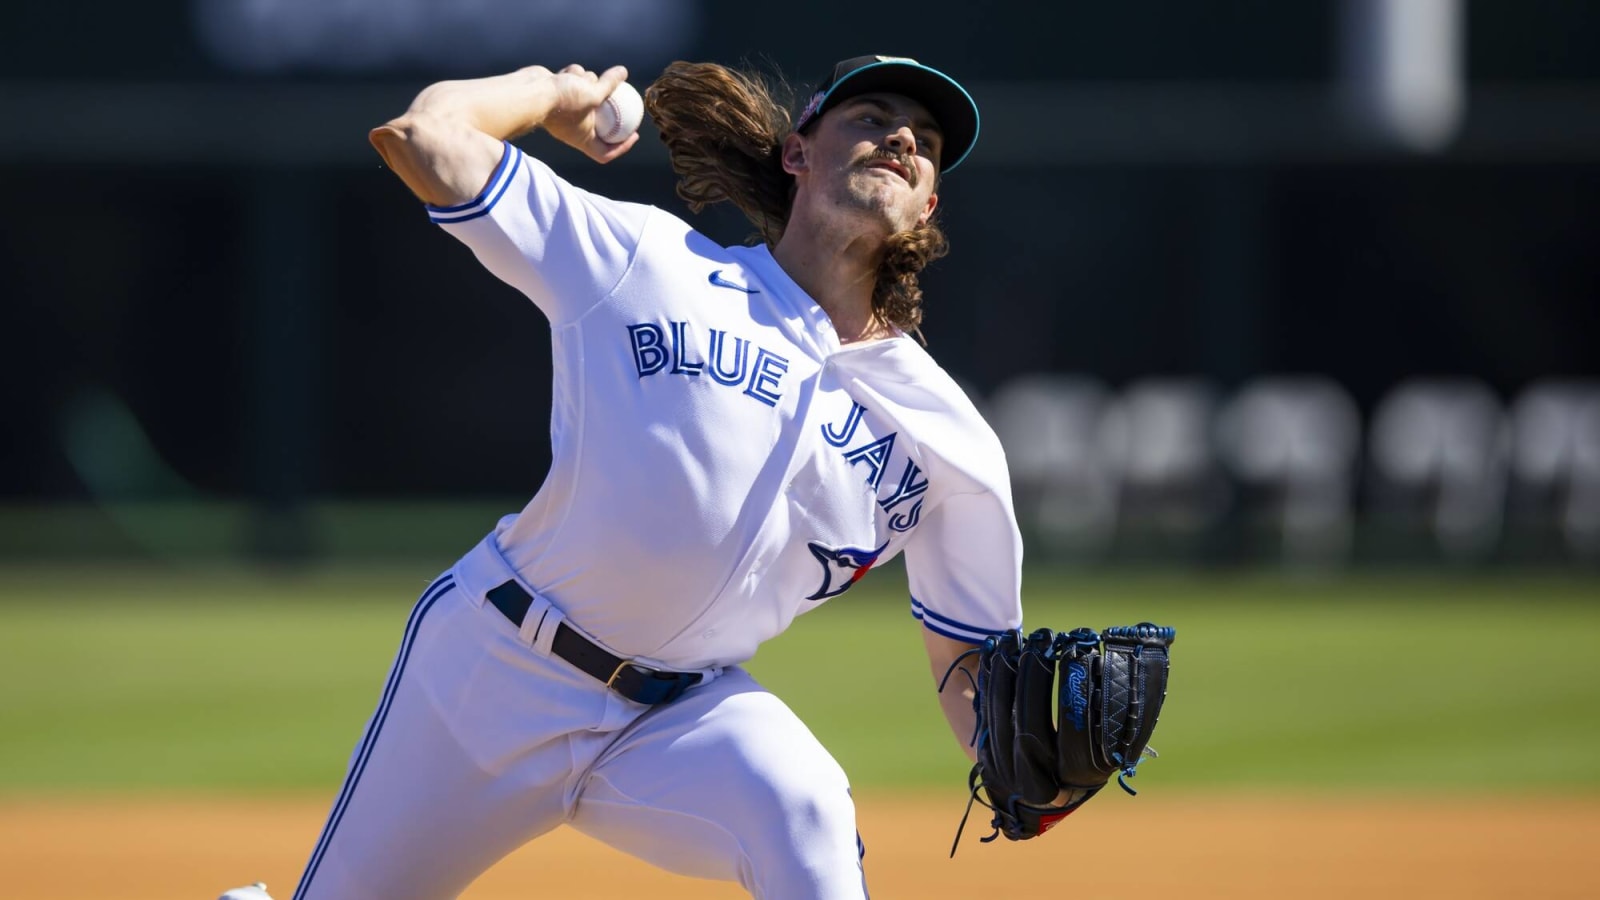 Blue Jays relief prospect Hagen Danner has reportedly been called up to the major leagues